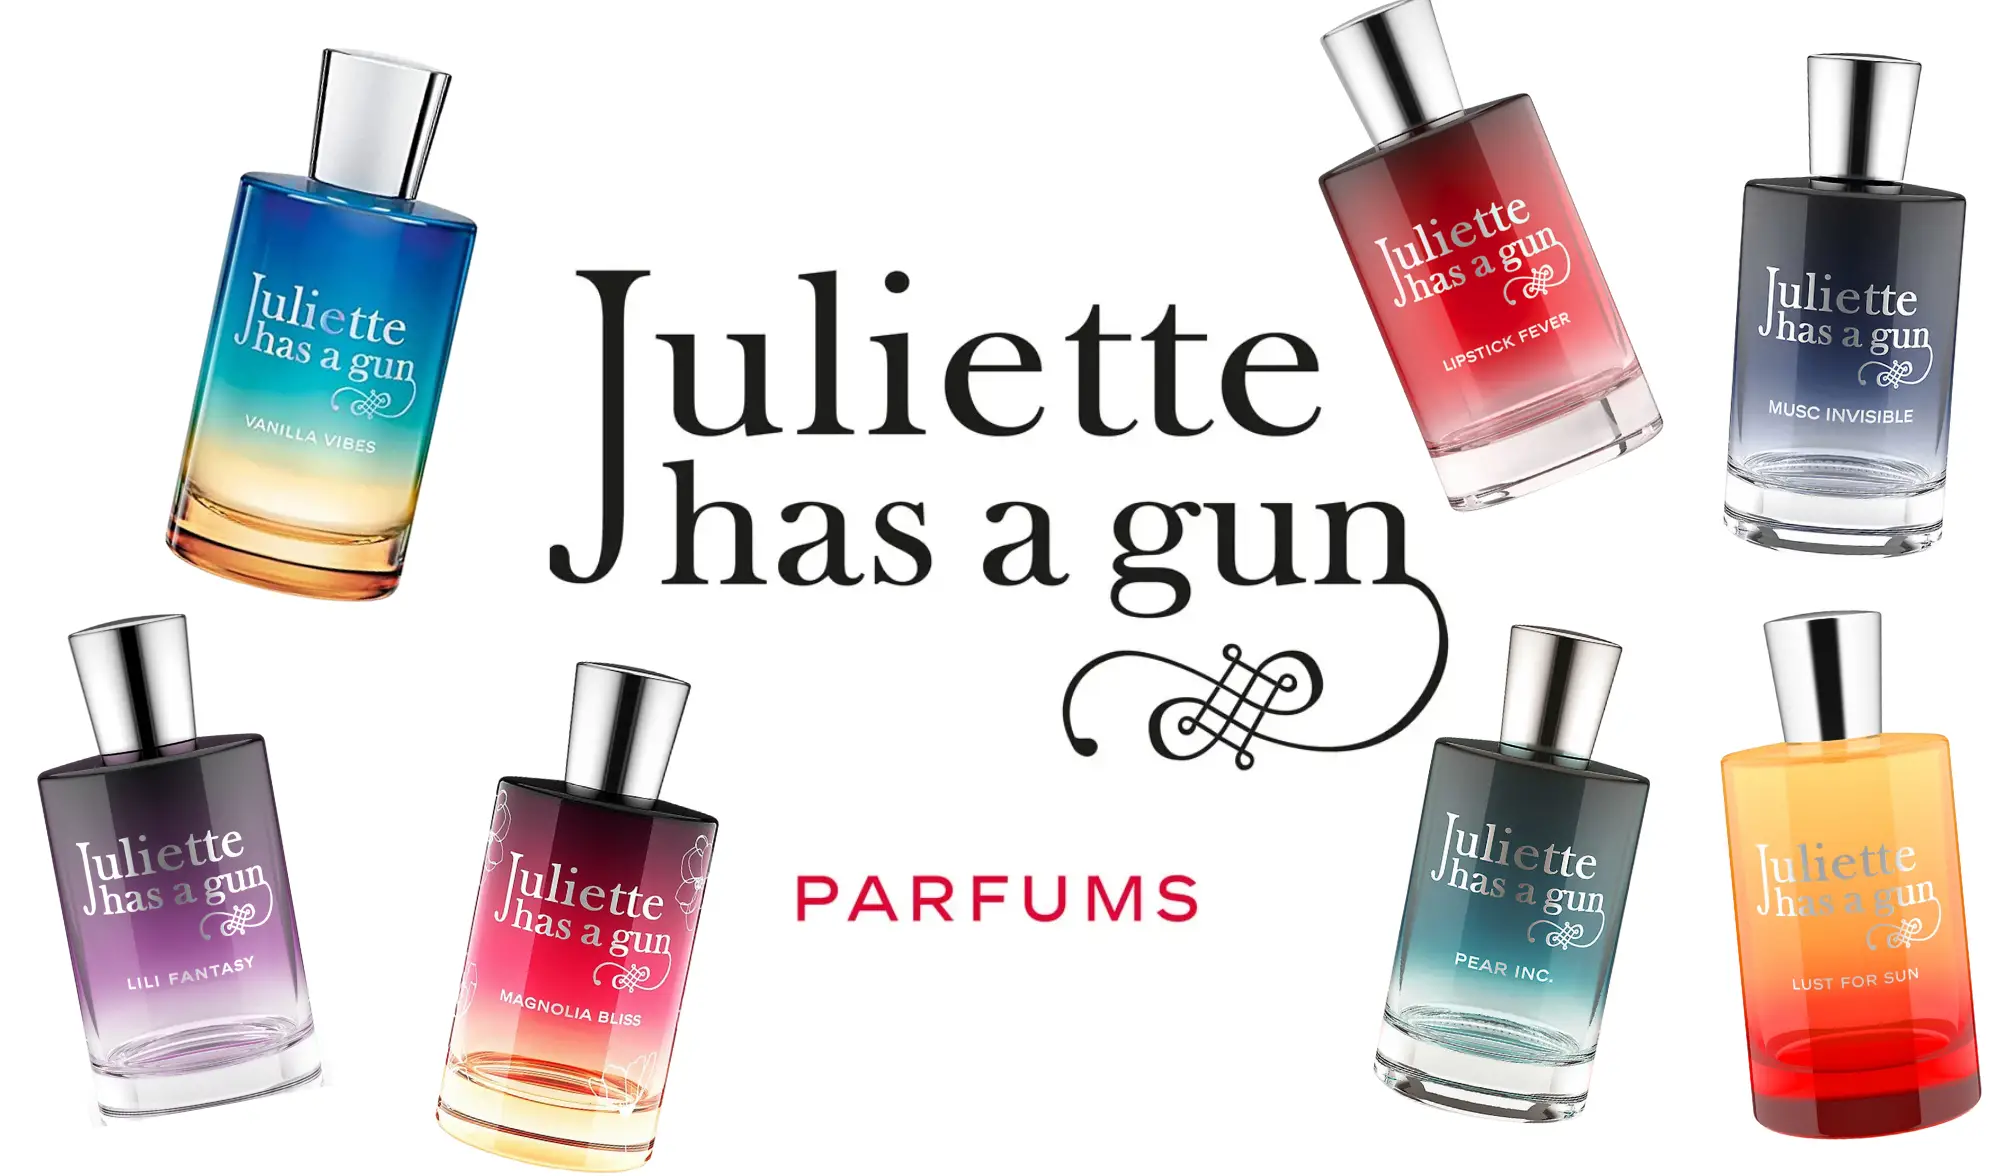 The Ultimate Guide To The Juliette Has A Gun Perfume Range